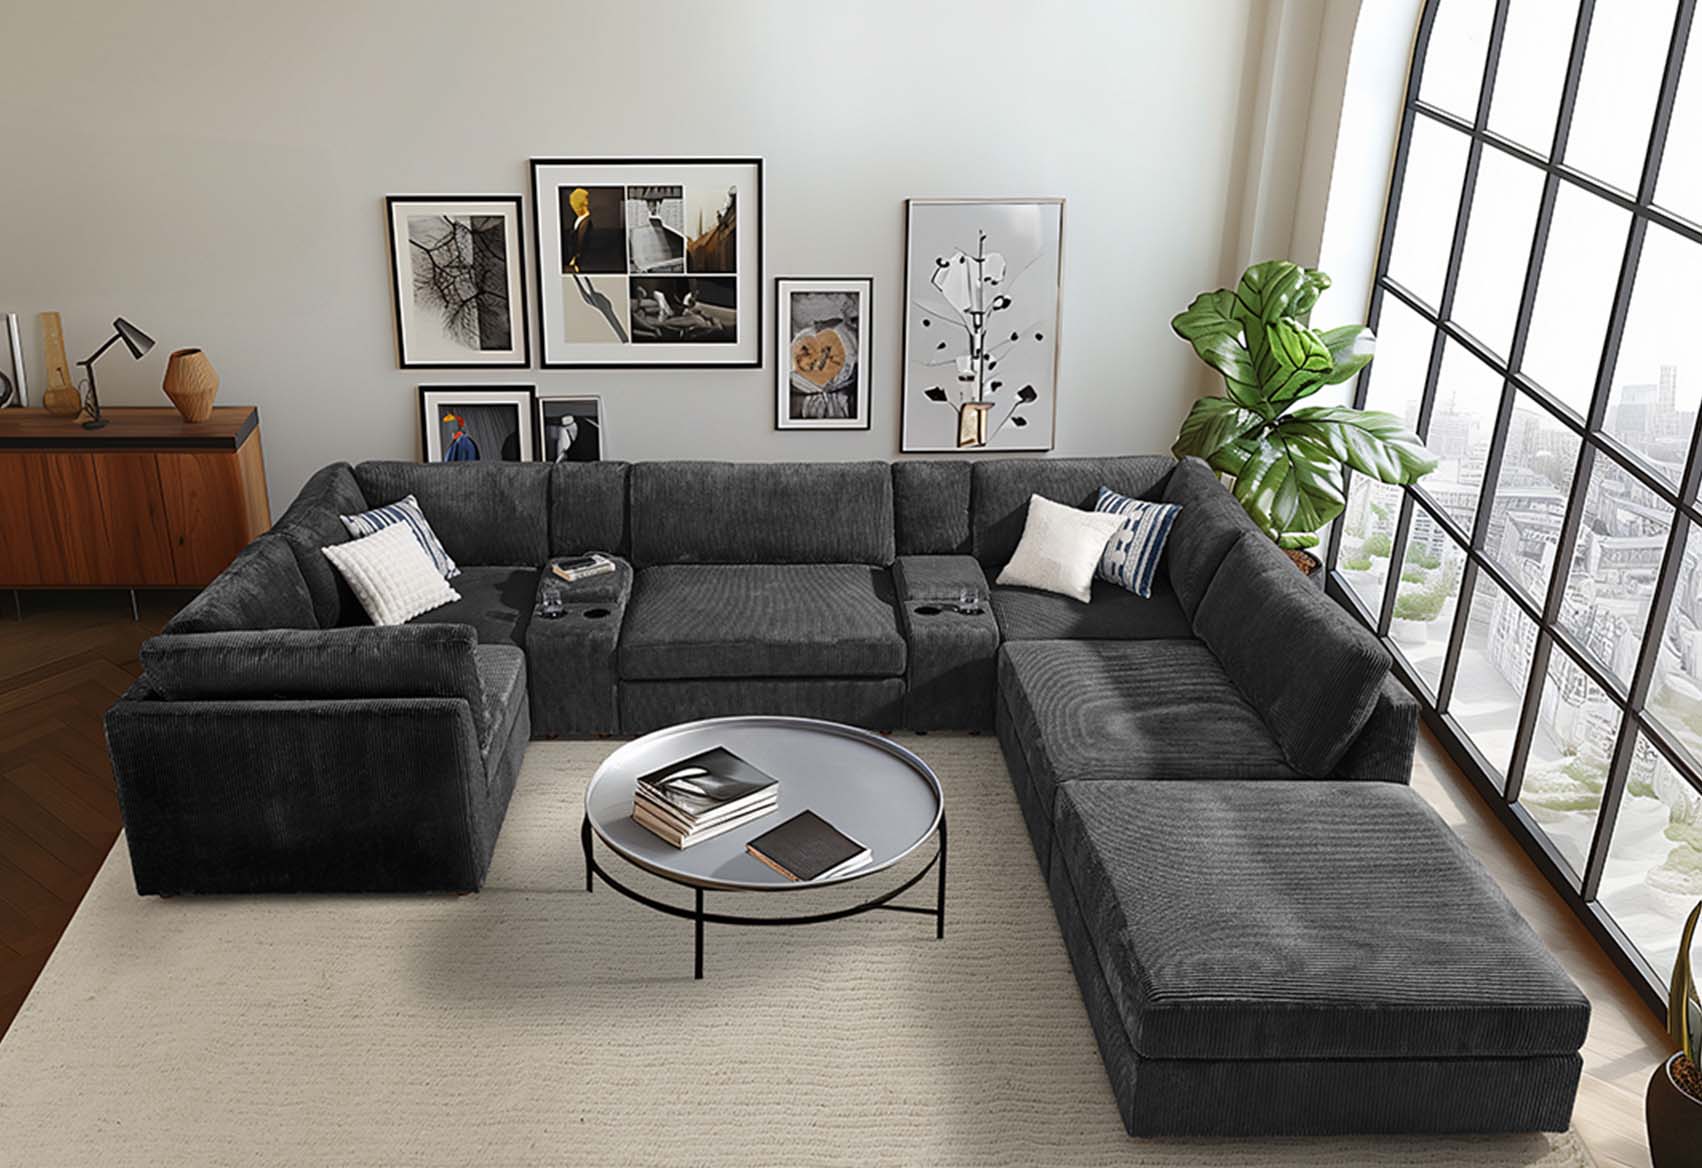 Decorating Styles and Color Pairings for a Modular Grey Couch